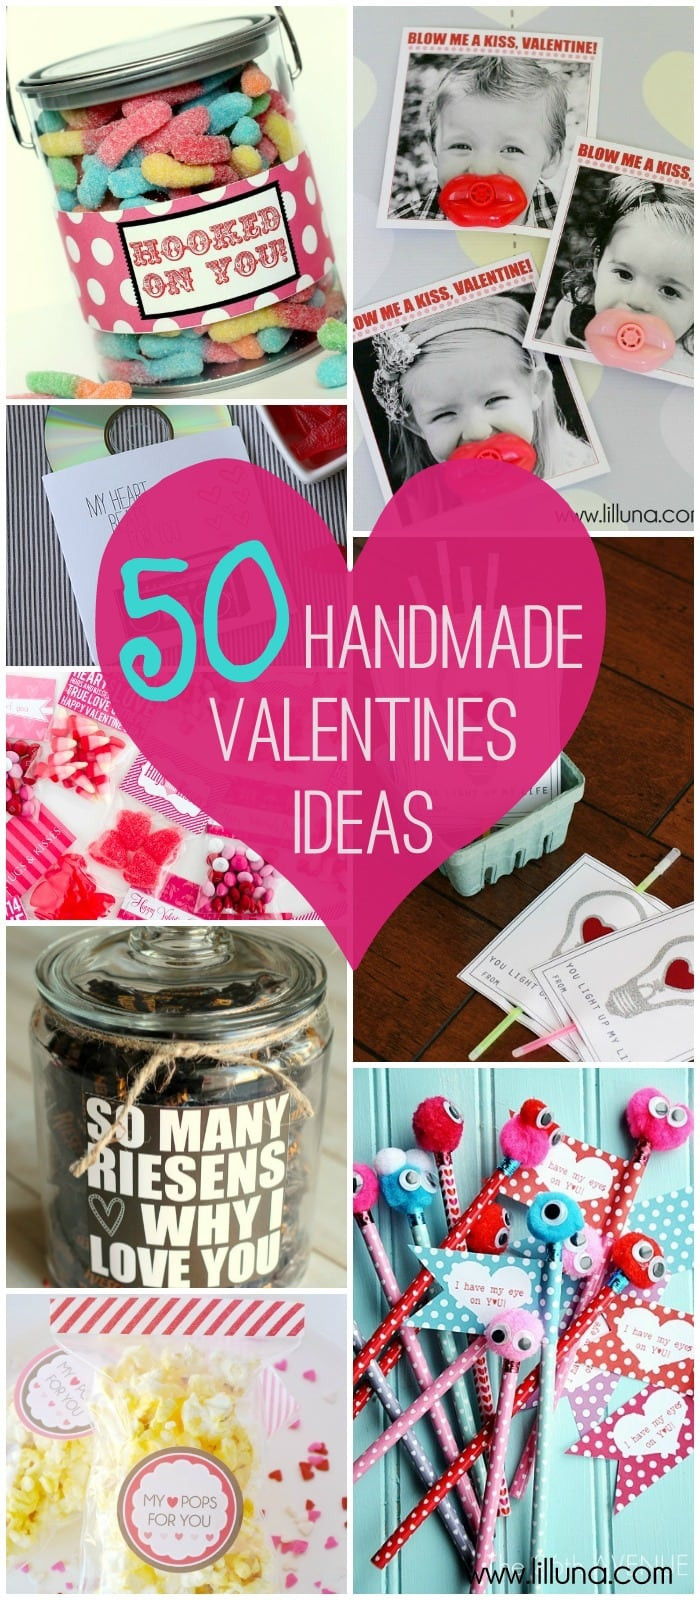 Cool Valentine Gift Ideas
 14 Gifts of Valentines with Free Printables plus MORE